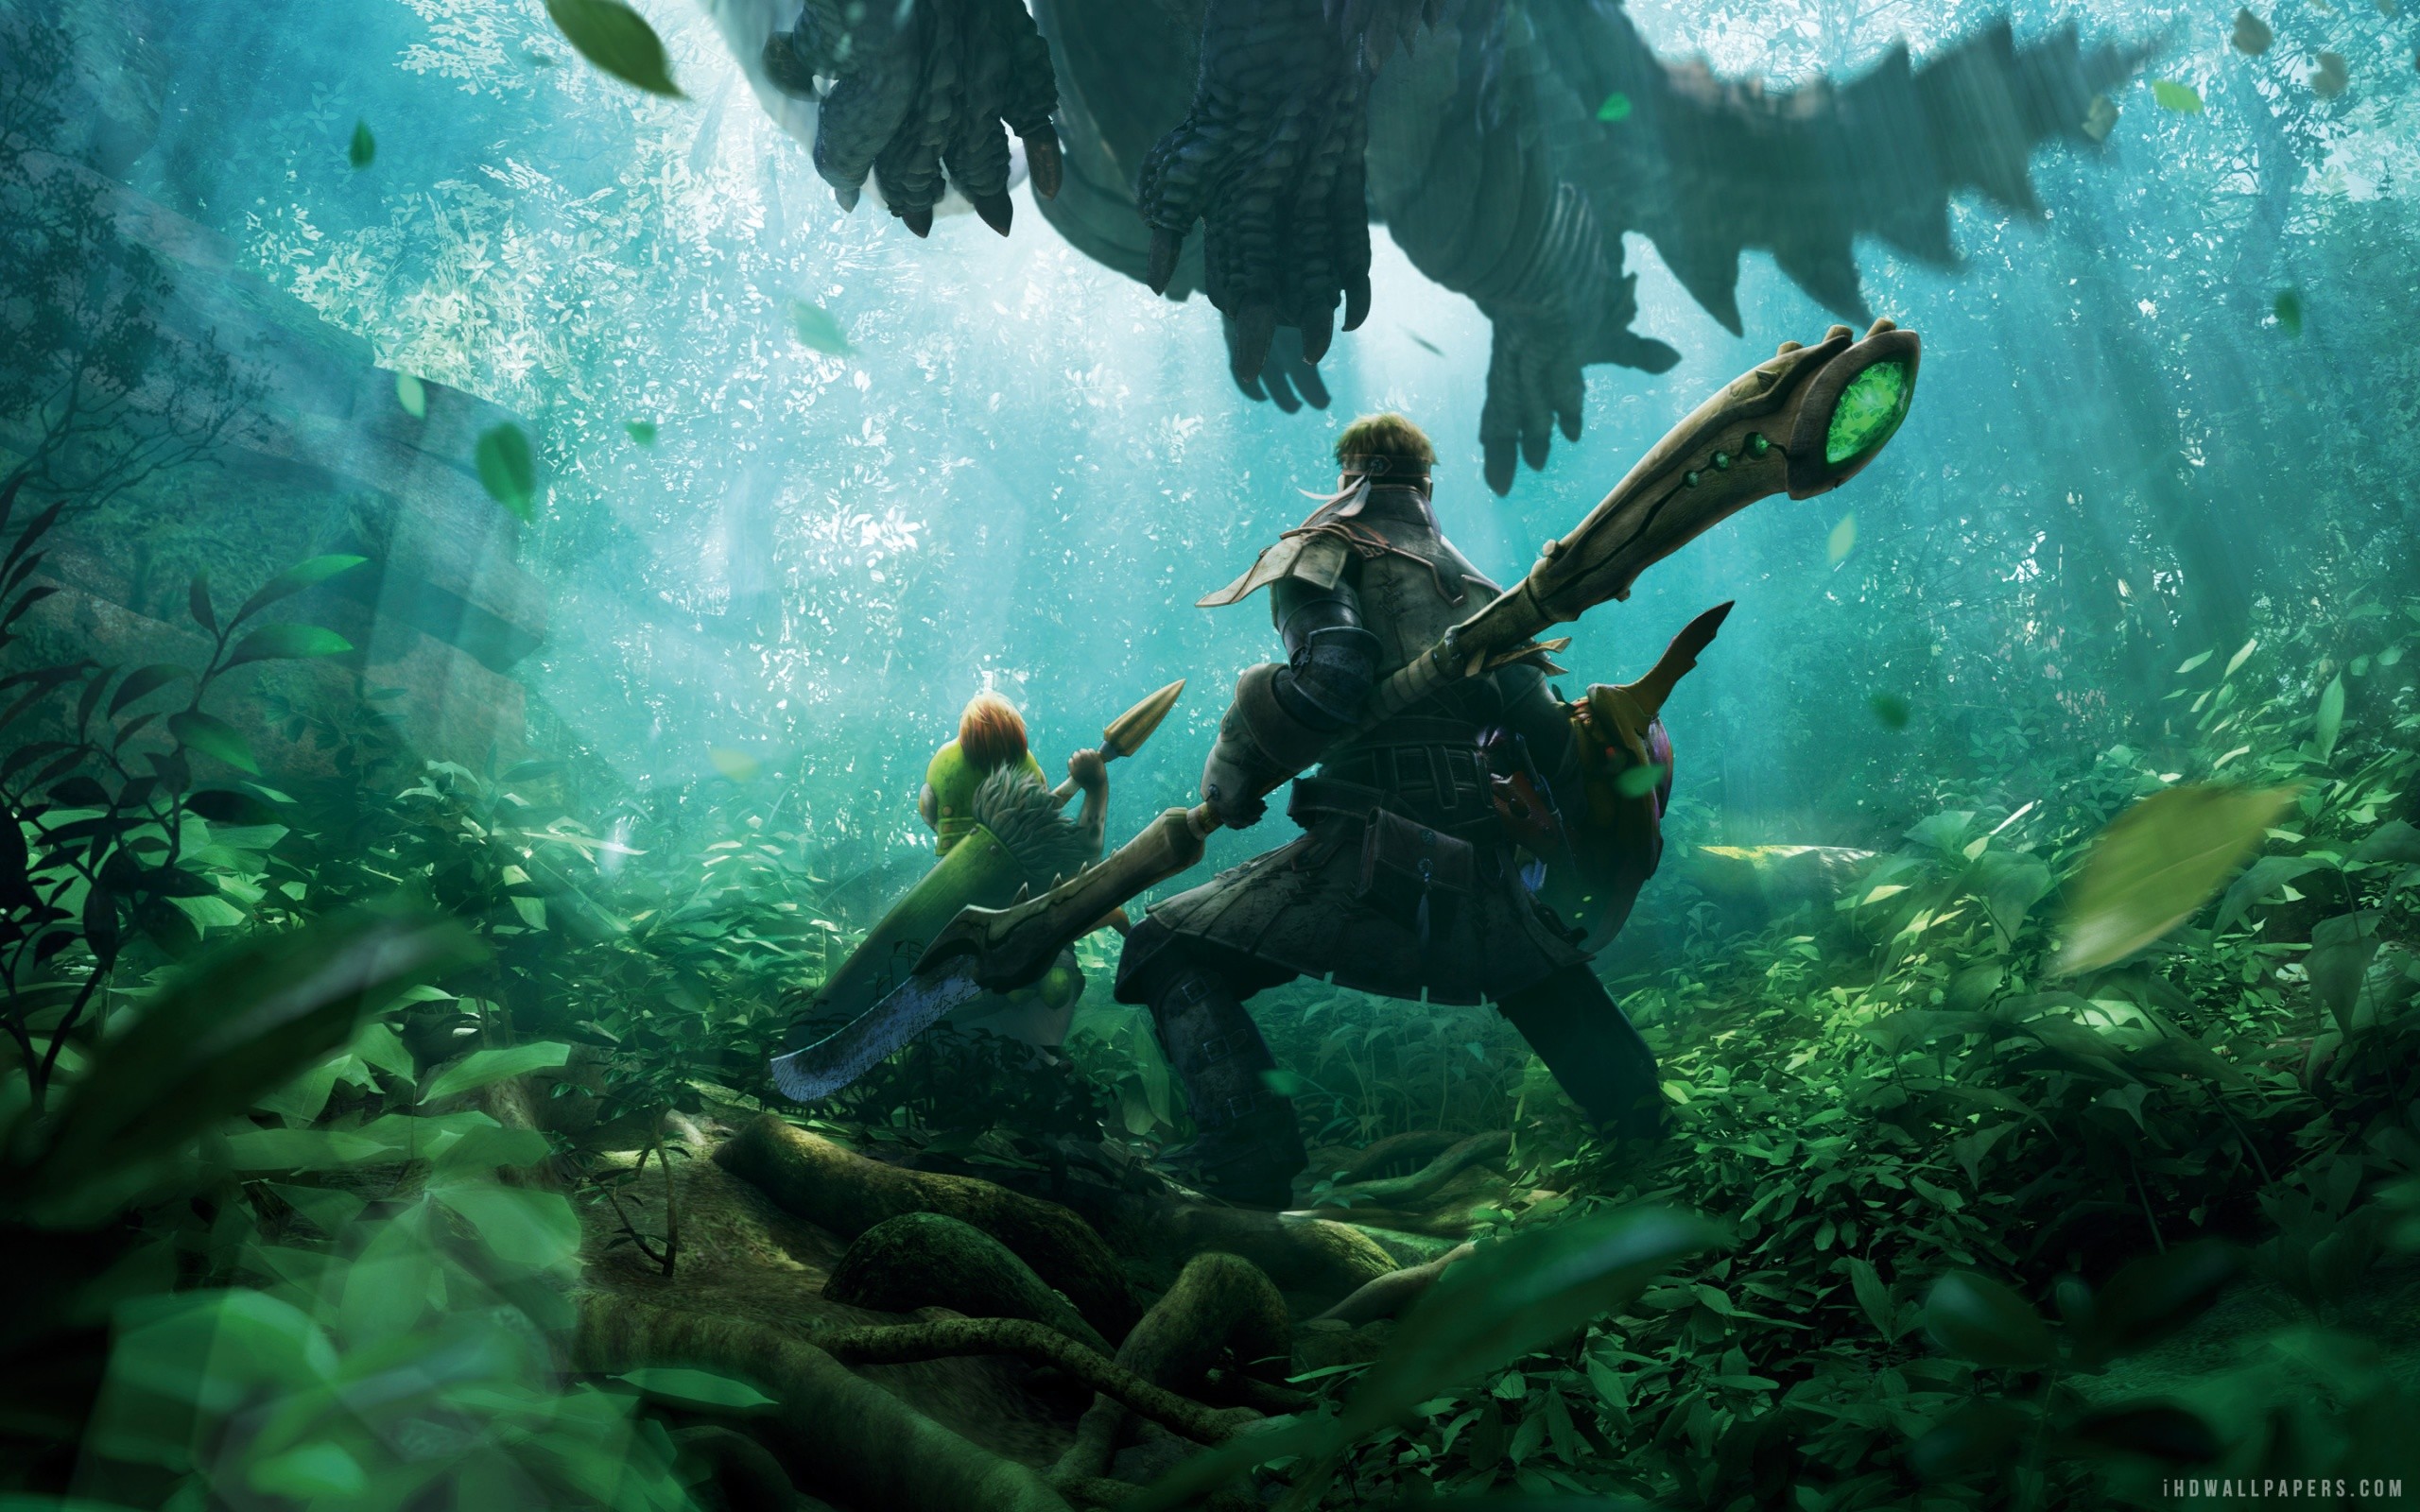 Monster Hunter HD Wallpapers Backgrounds Wallpaper | HD Wallpapers |  Pinterest | Monster hunter, Hd wallpaper and Wallpaper